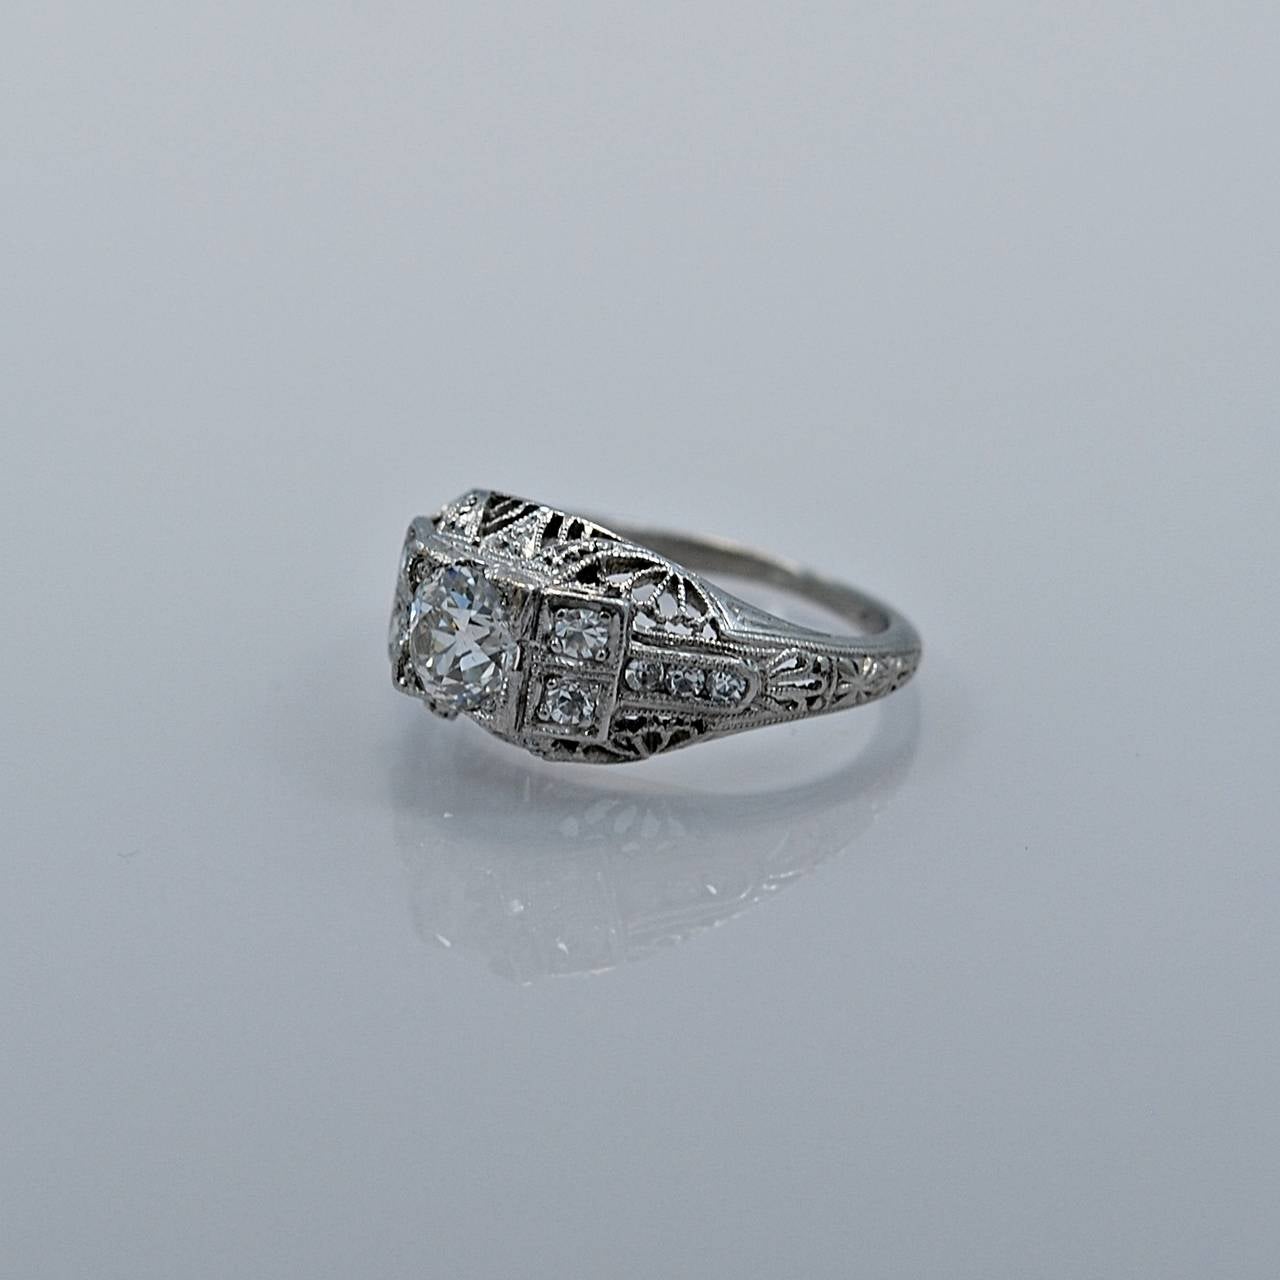 An exceptional Platinum & Diamond Art Deco Engagement Ring by S. Kirk & Son. This beautiful ring is highlighted by gorgeous filigree & pierced decoration, supporting a .53ct. apx. European cut diamond that is VS2 in clarity and H in color. The